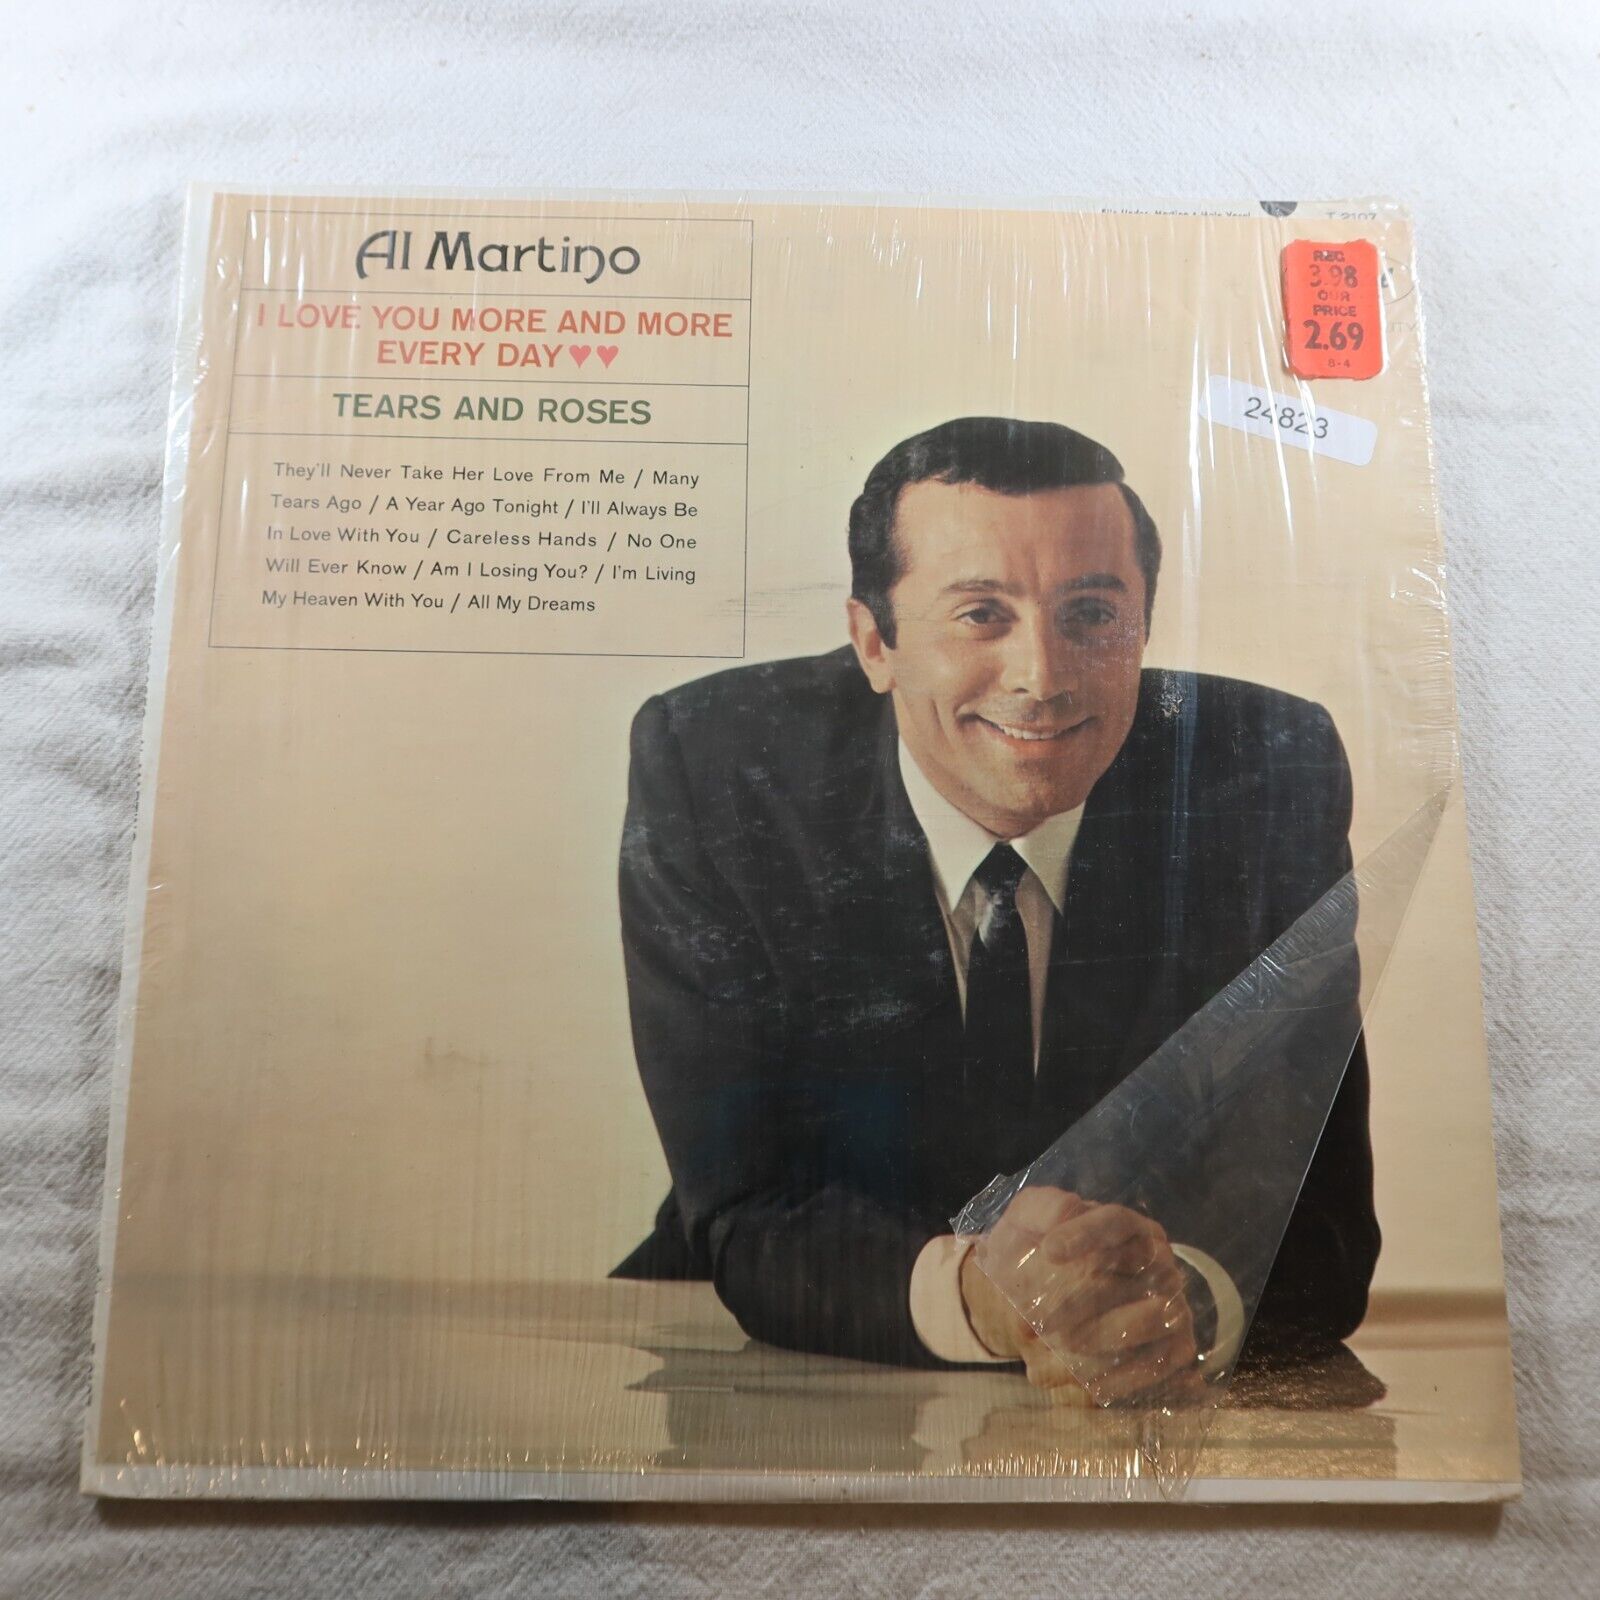 Al Martino I Love You More And More Every Day Tears And Roses   Record Album LP